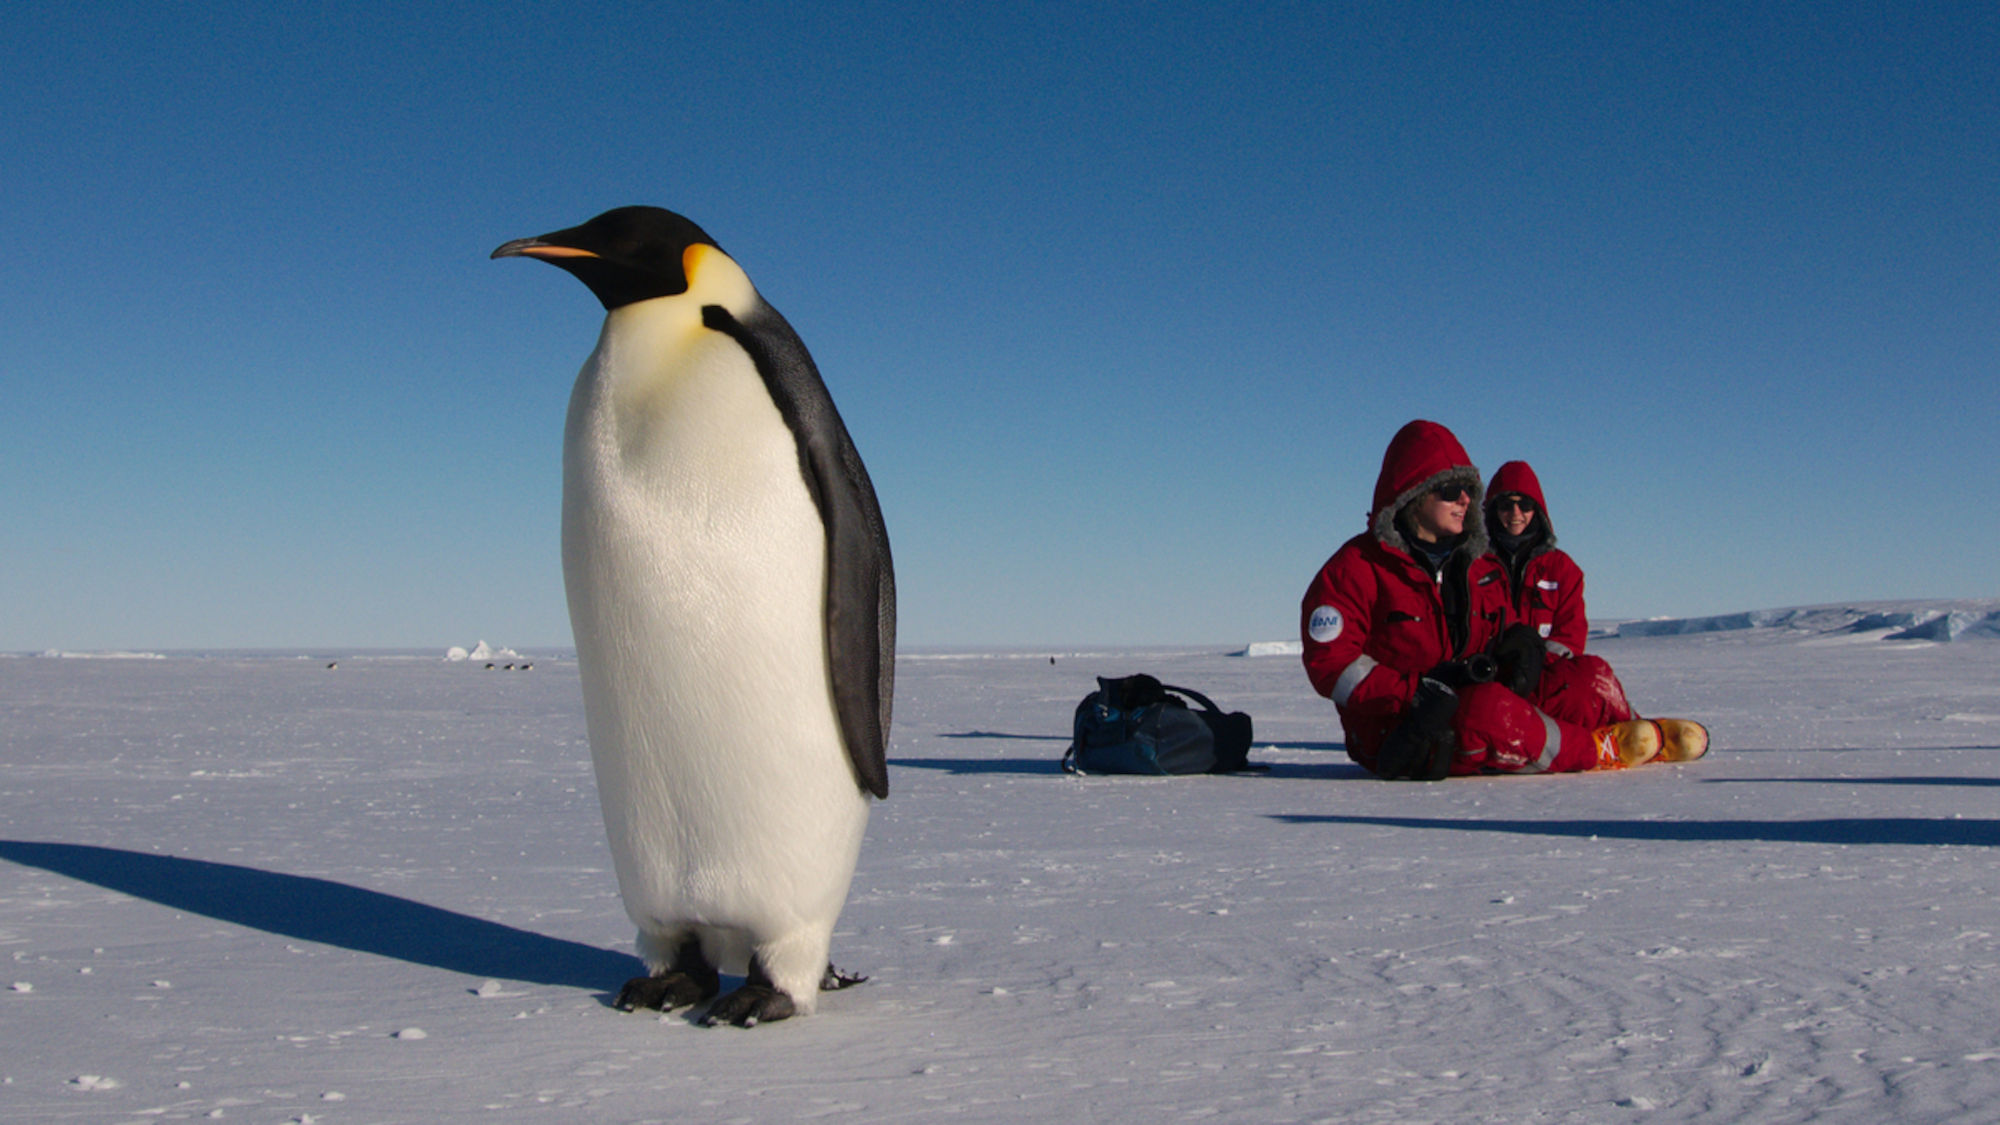 Jess Bunchek and Linda Ort sit in Akta Bay with an emperor penguin in front of them.